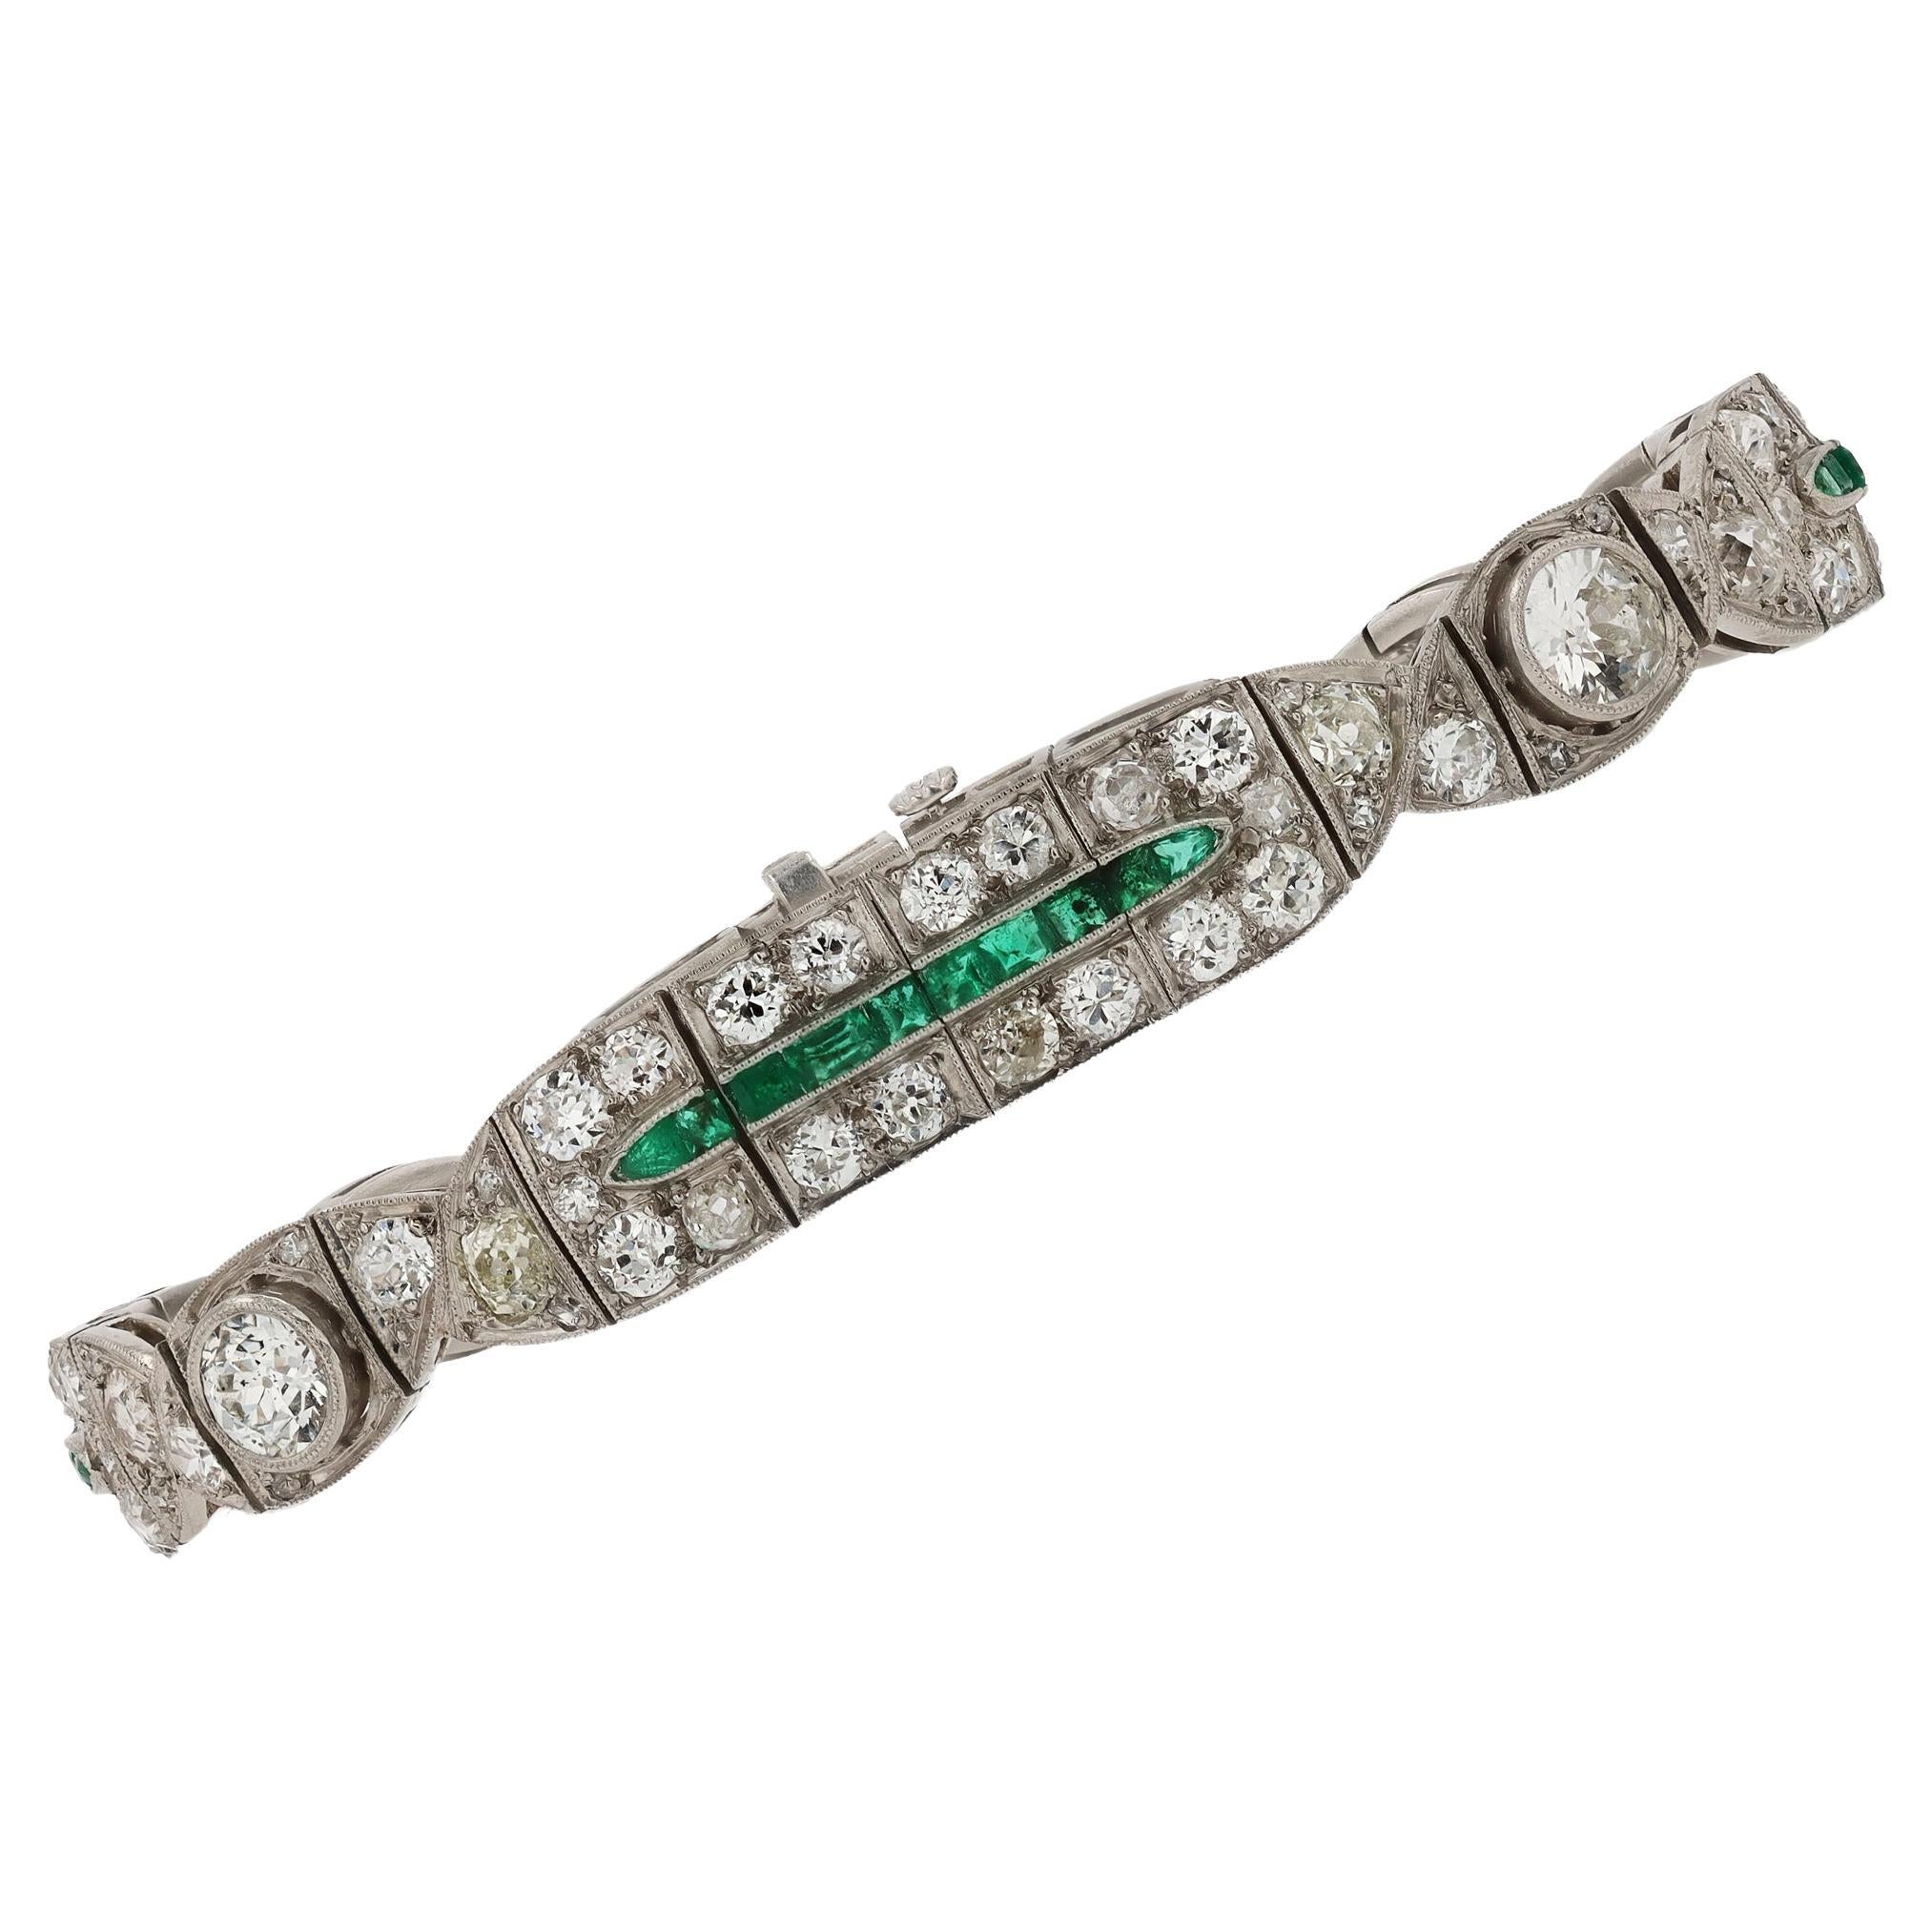 This antique 1920s bracelet is in a league of its own regarding exquisite beauty and the distinct craftsmanship of the era. Displaying Art Deco's signature styles flanked with rows of enchanting old cut diamonds and calibre cut emeralds. Each